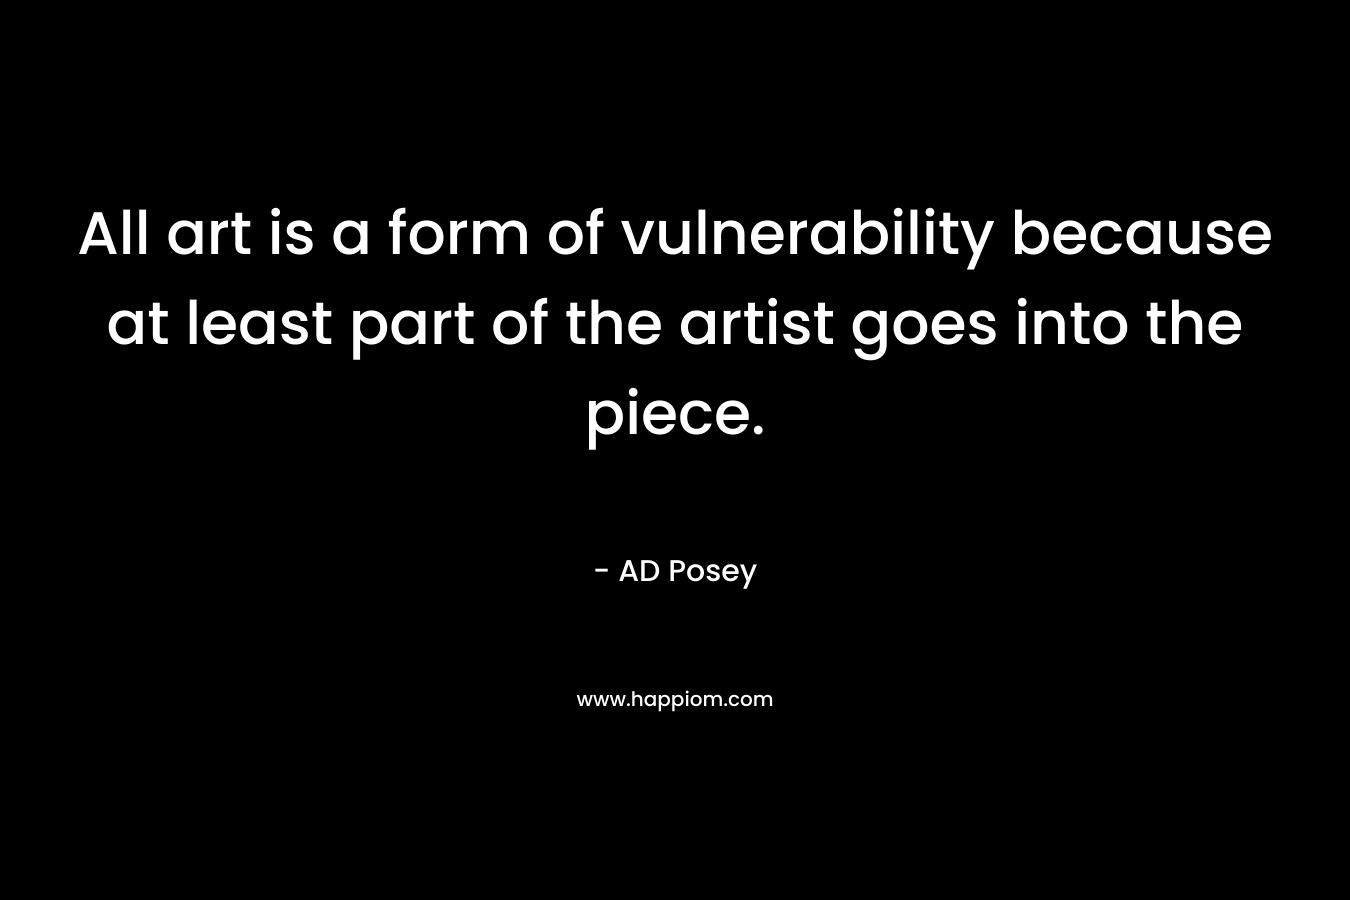 All art is a form of vulnerability because at least part of the artist goes into the piece.